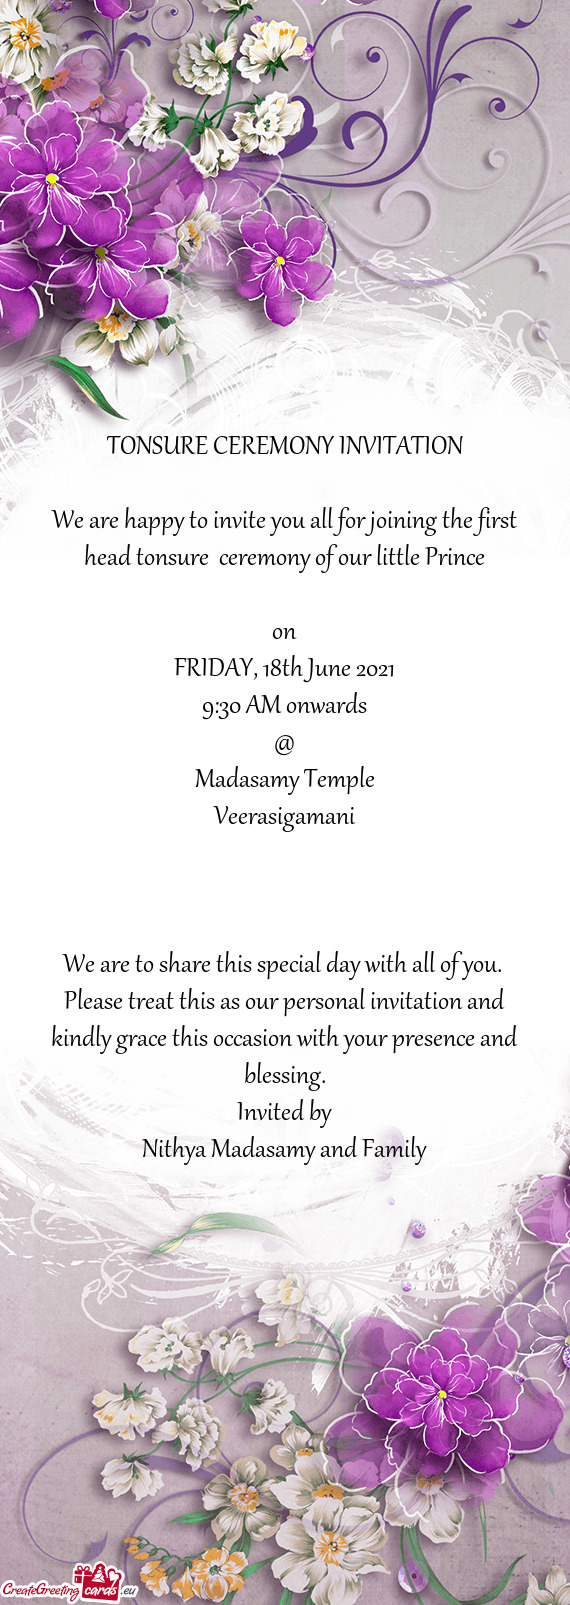 TONSURE CEREMONY INVITATION
 
 We are happy to invite you all for joining the first head tonsure ce